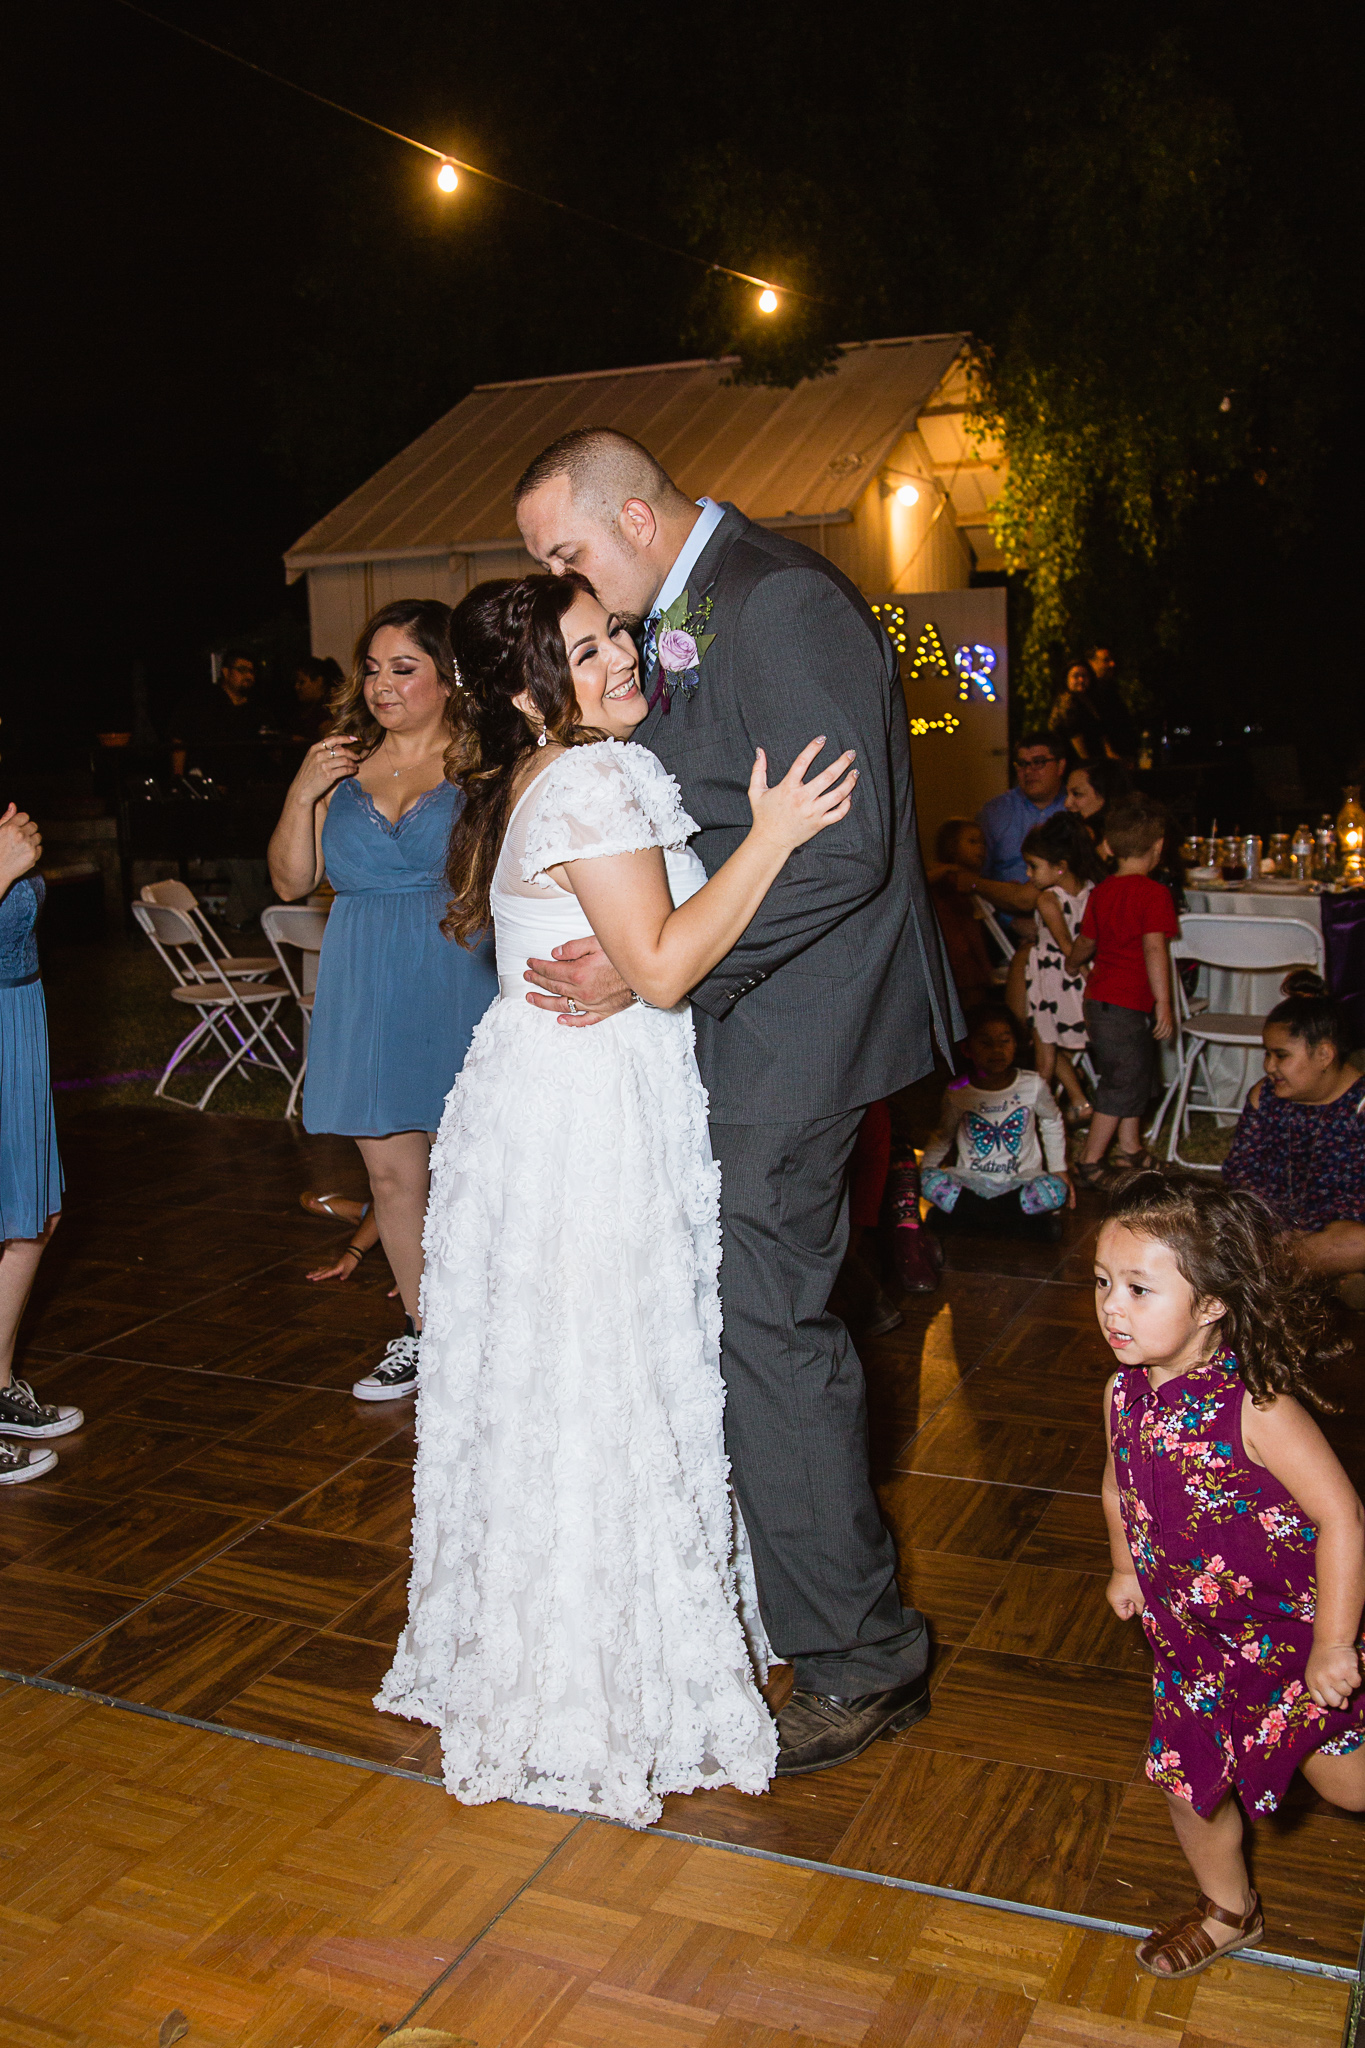 Bride and groom dance together with guests at the wedding reception by PMA Photography.